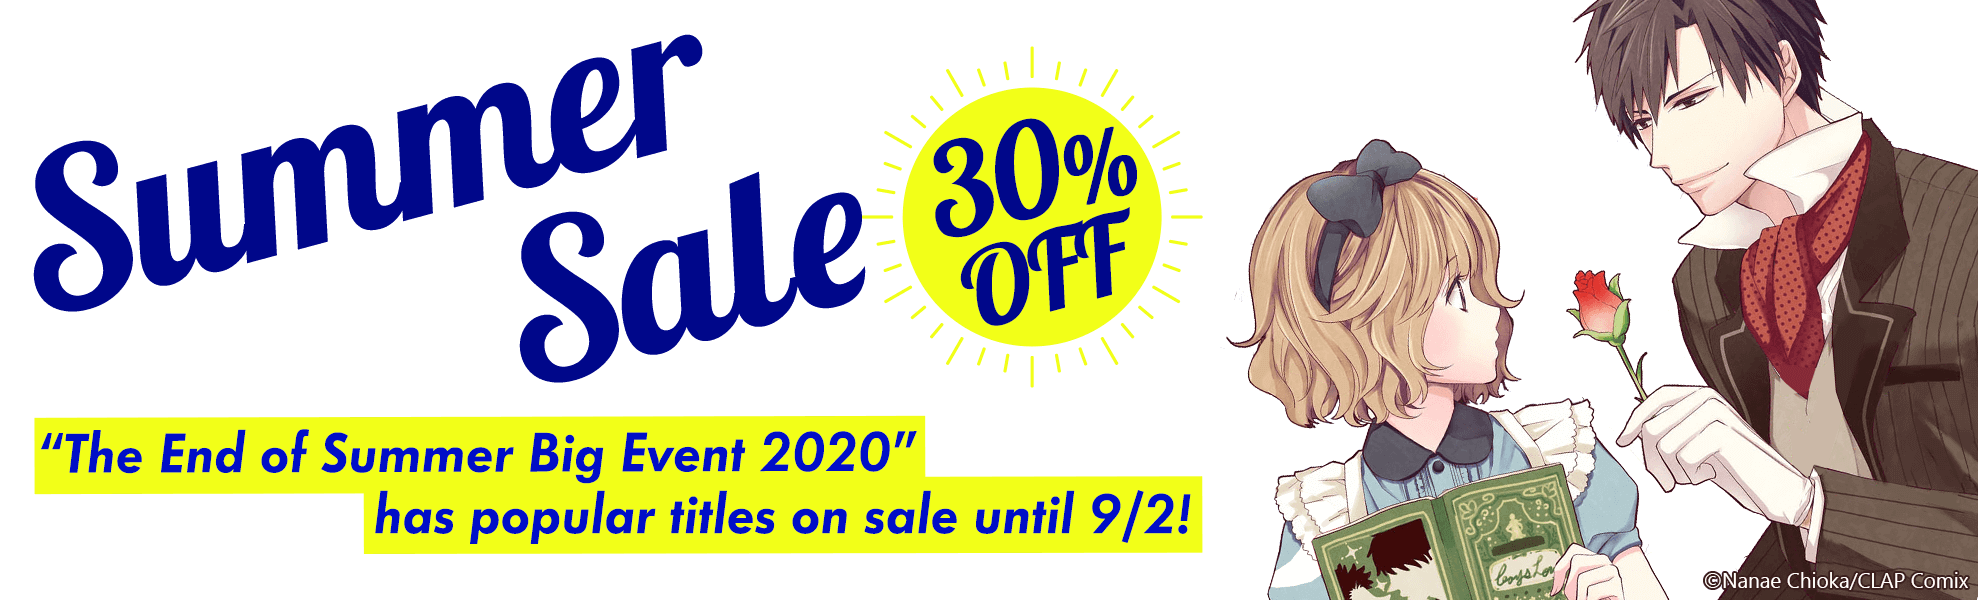 Summer Sale 30% off "The End of Summer Big Event 2020" has popular titles on sale until 9/2!